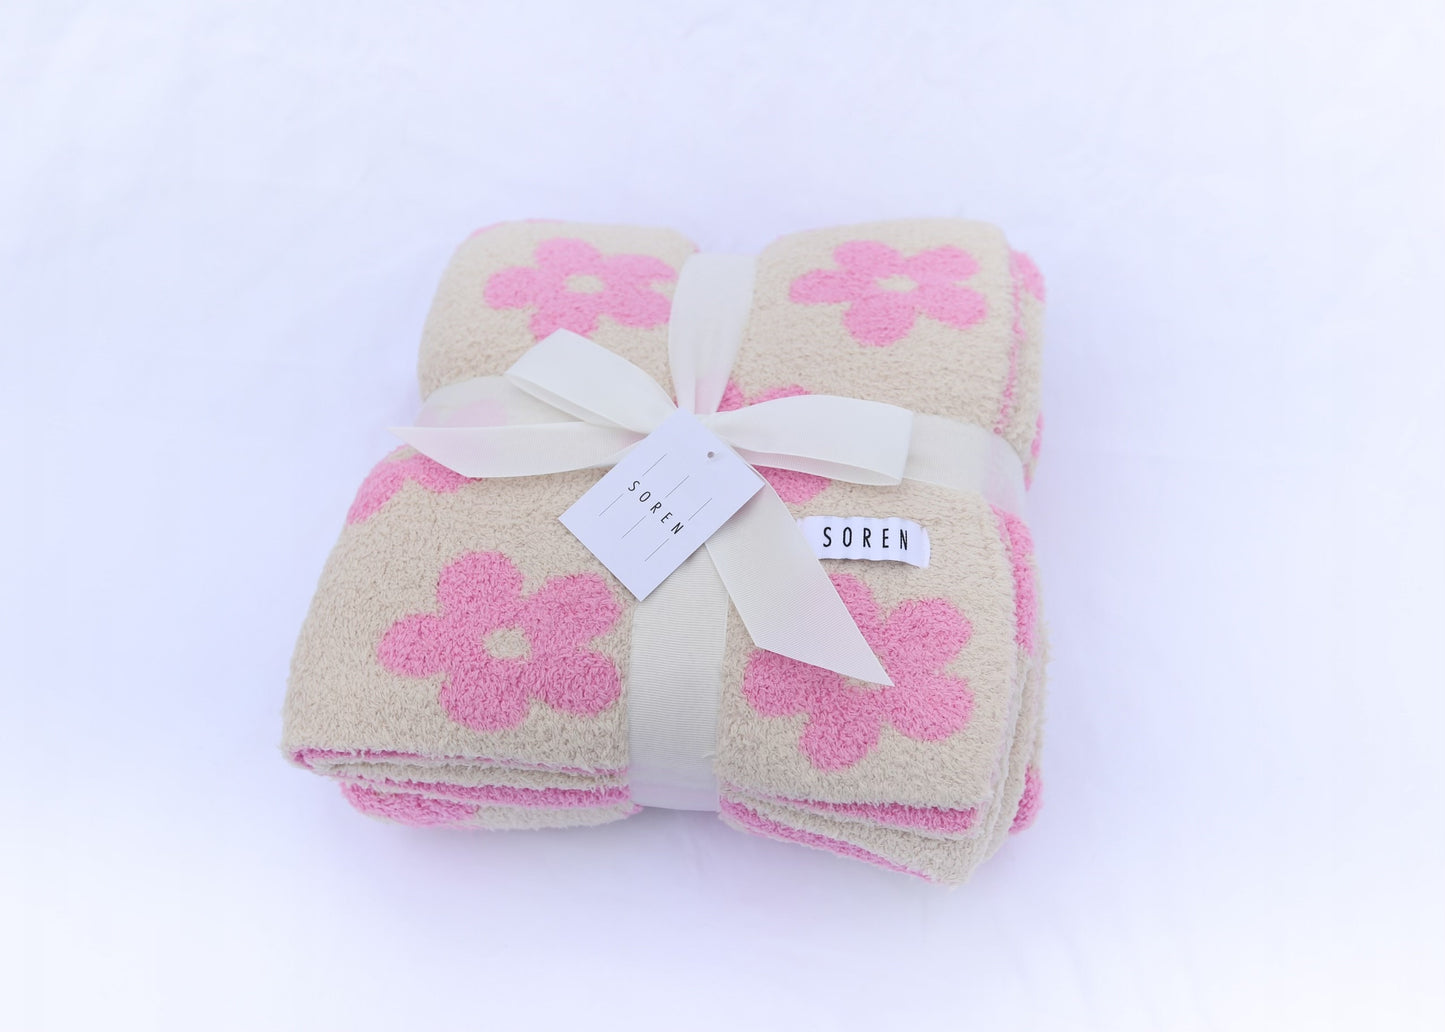 Pink and Cream Daisy Blanket